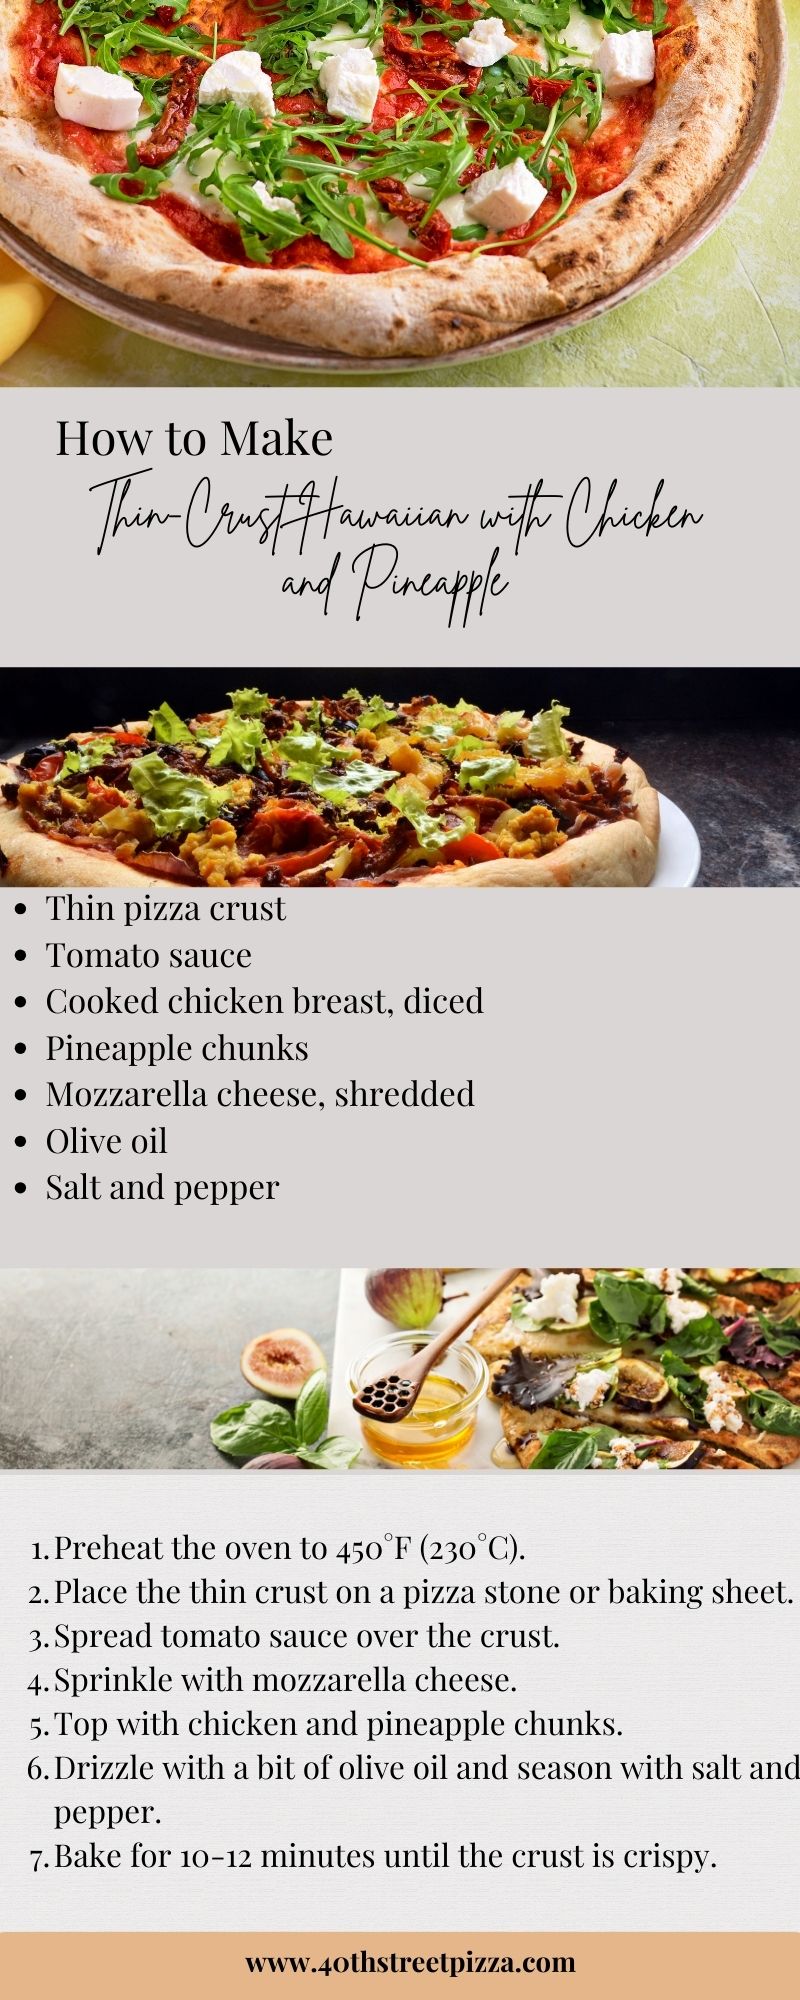 Thin-Crust Hawaiian with Chicken and Pineapple infographic